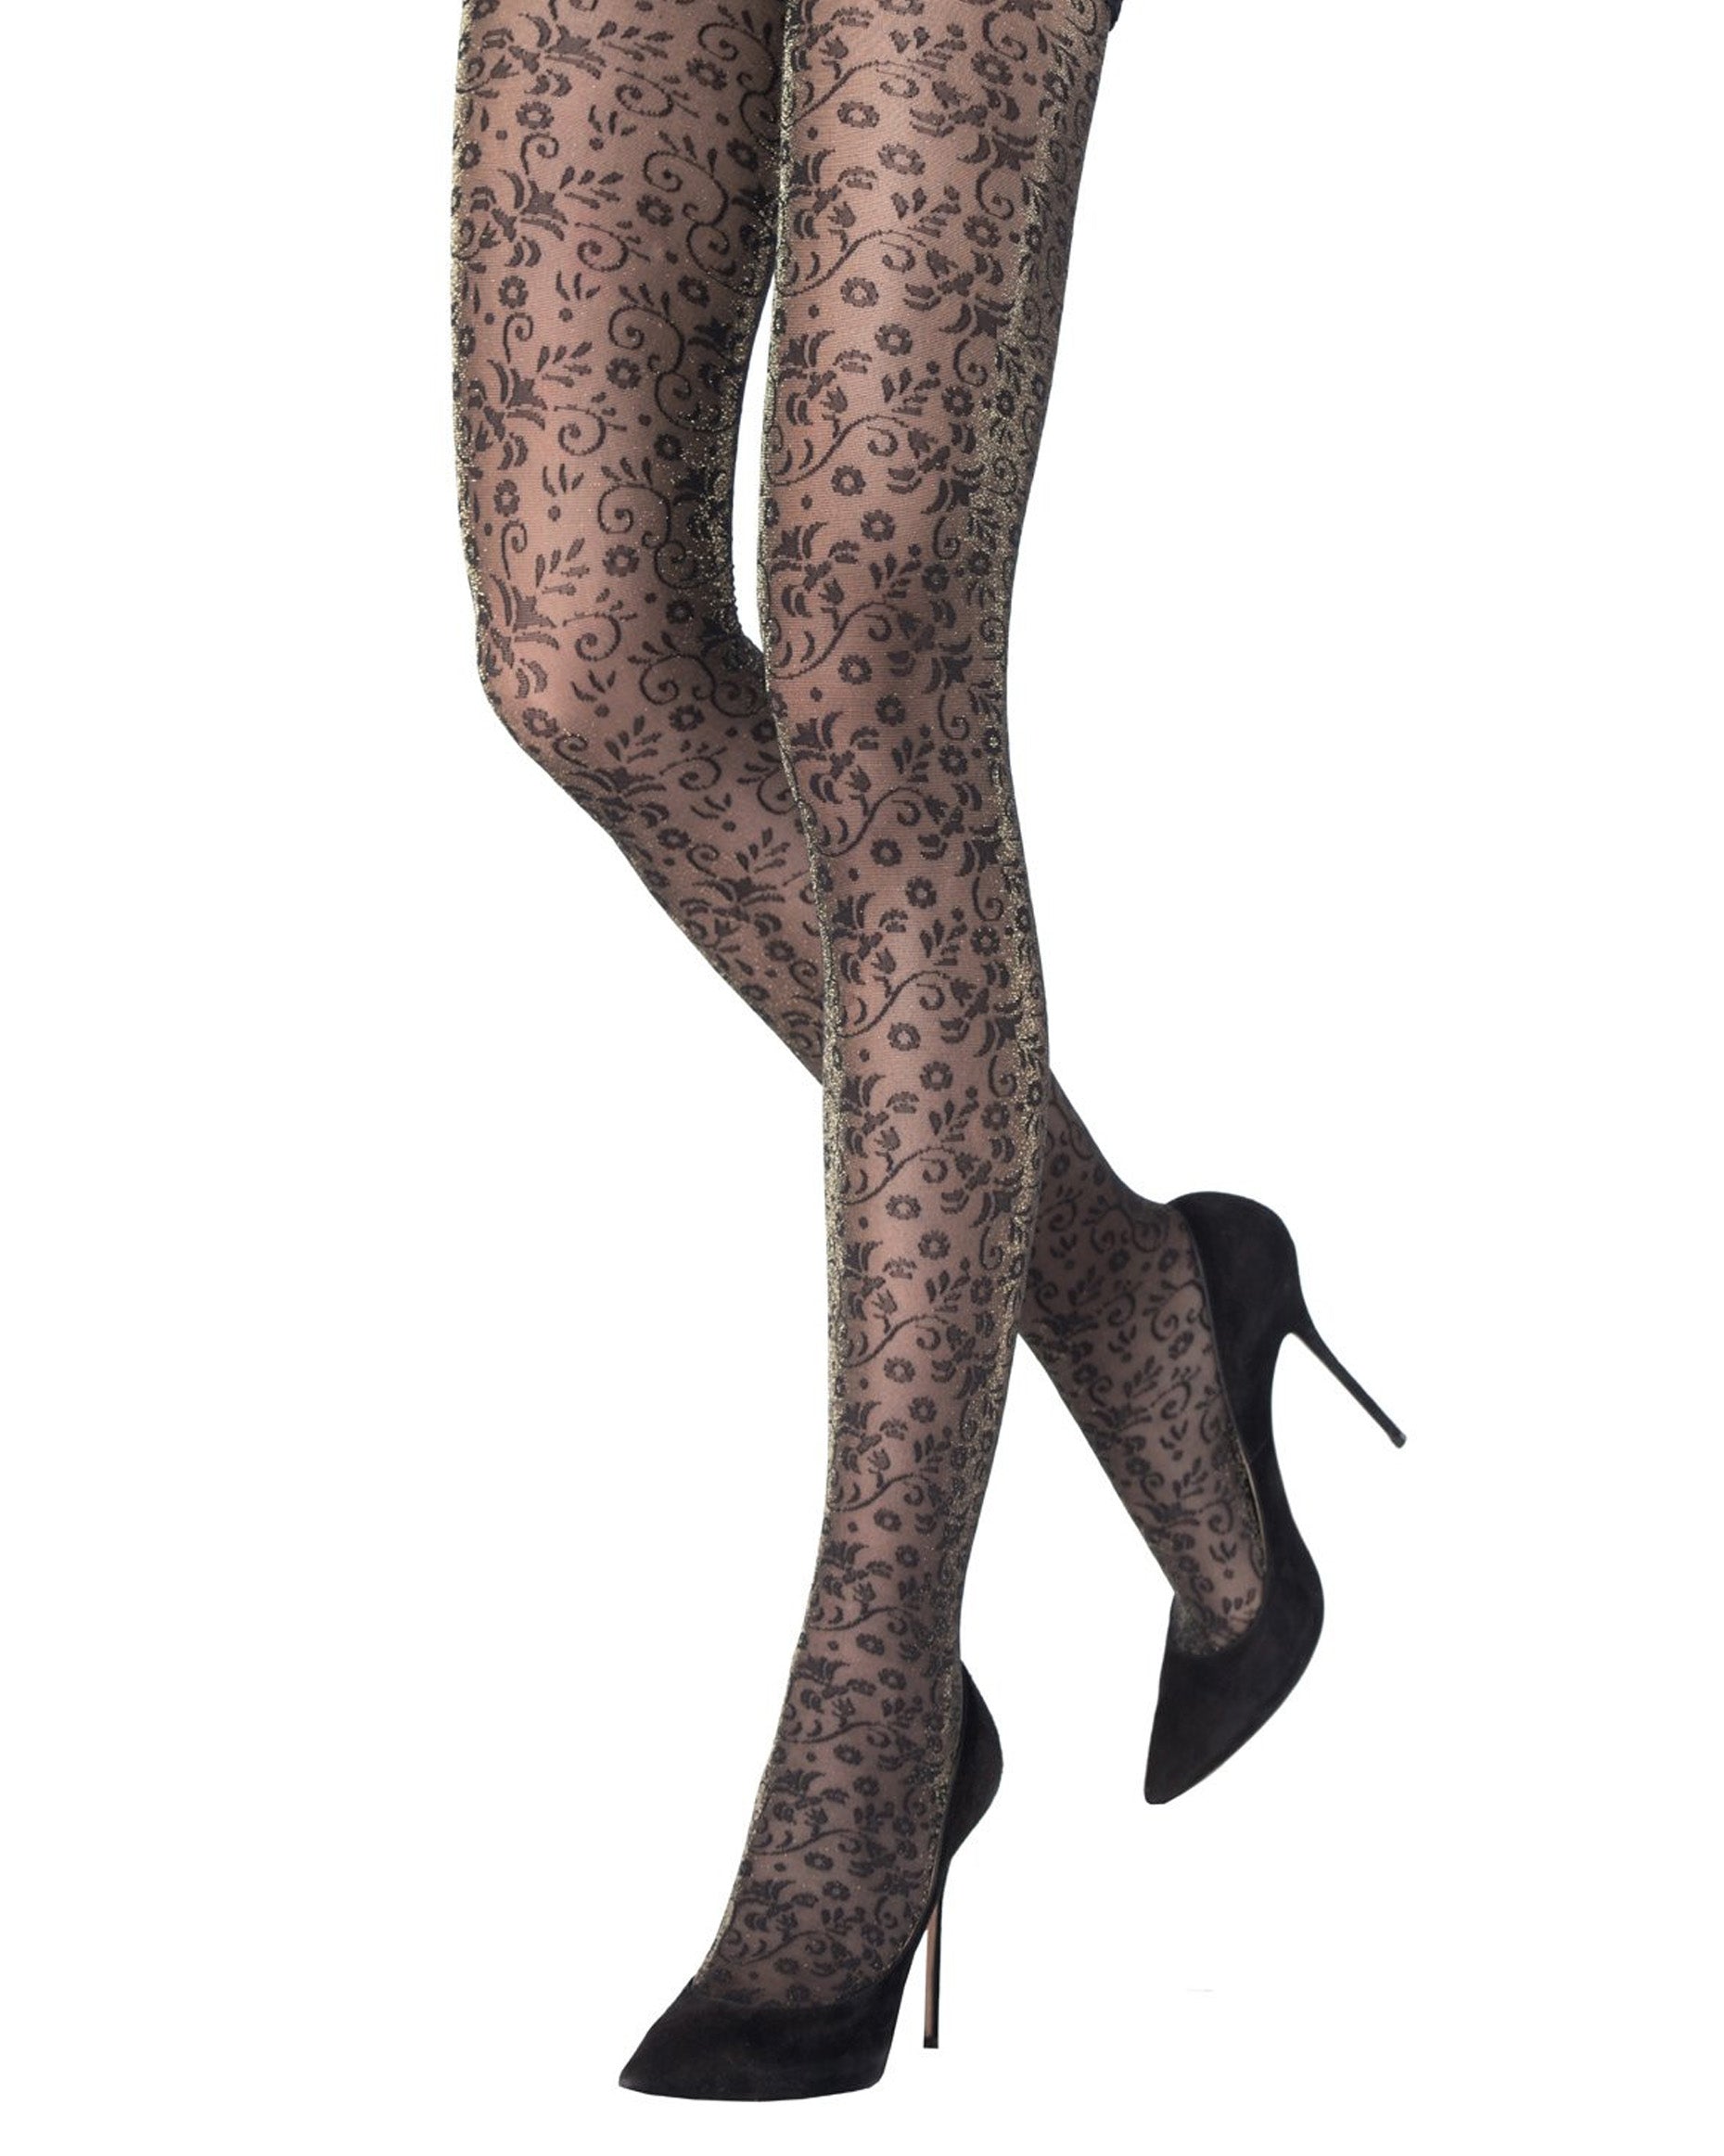 Emilio Cavallini Golden Orchid Tights - Sheer black fashion tights with an all over floral pattern with sparkly gold lamé lurex